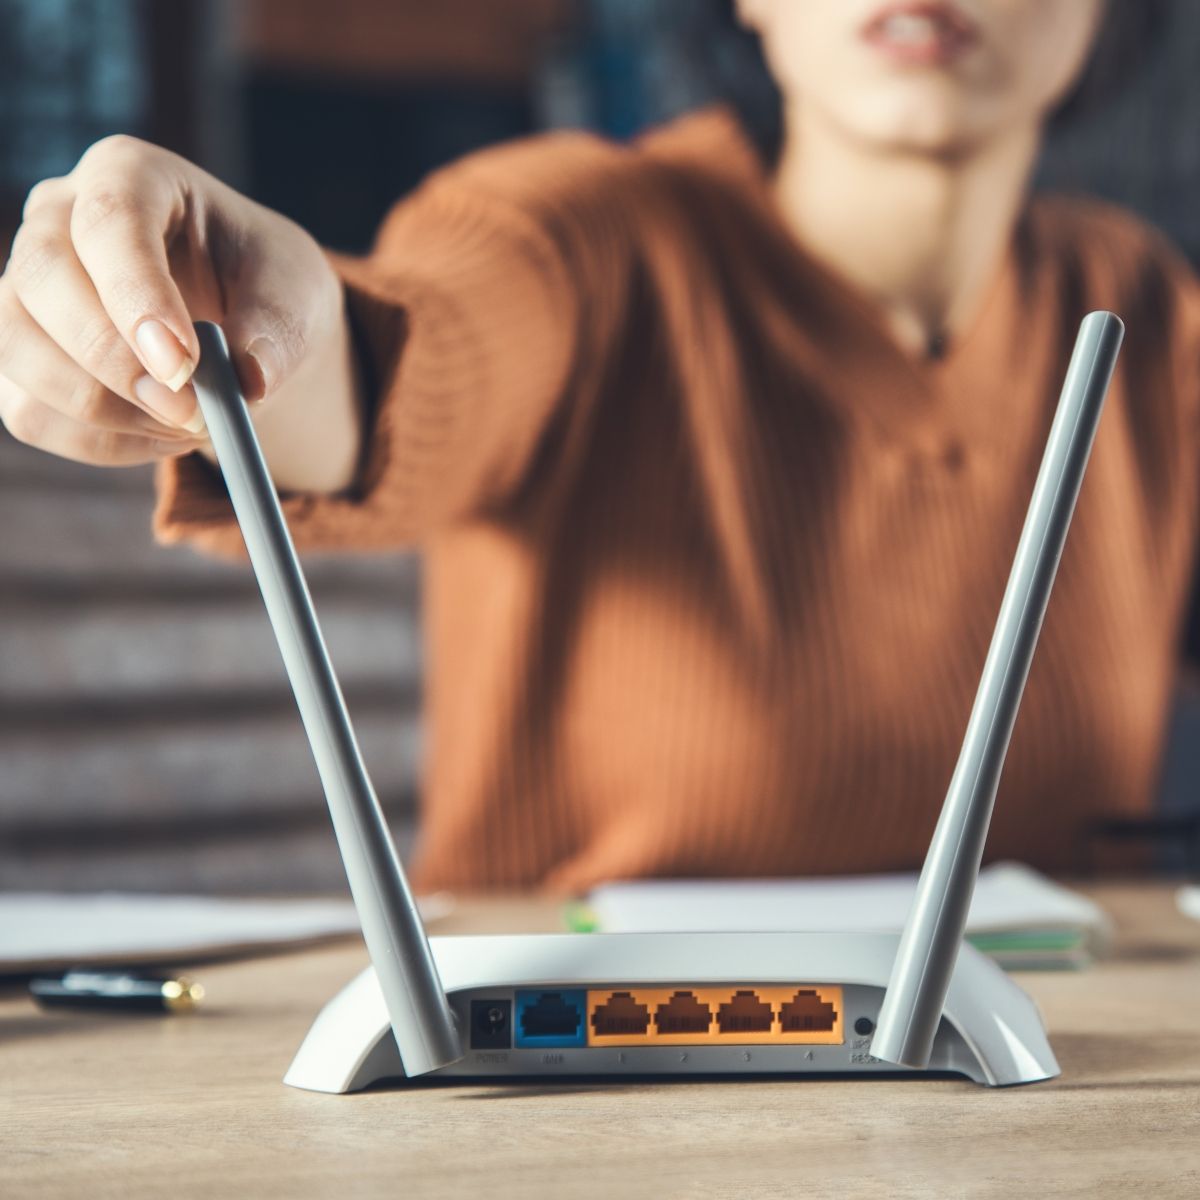 Woman adjusting router